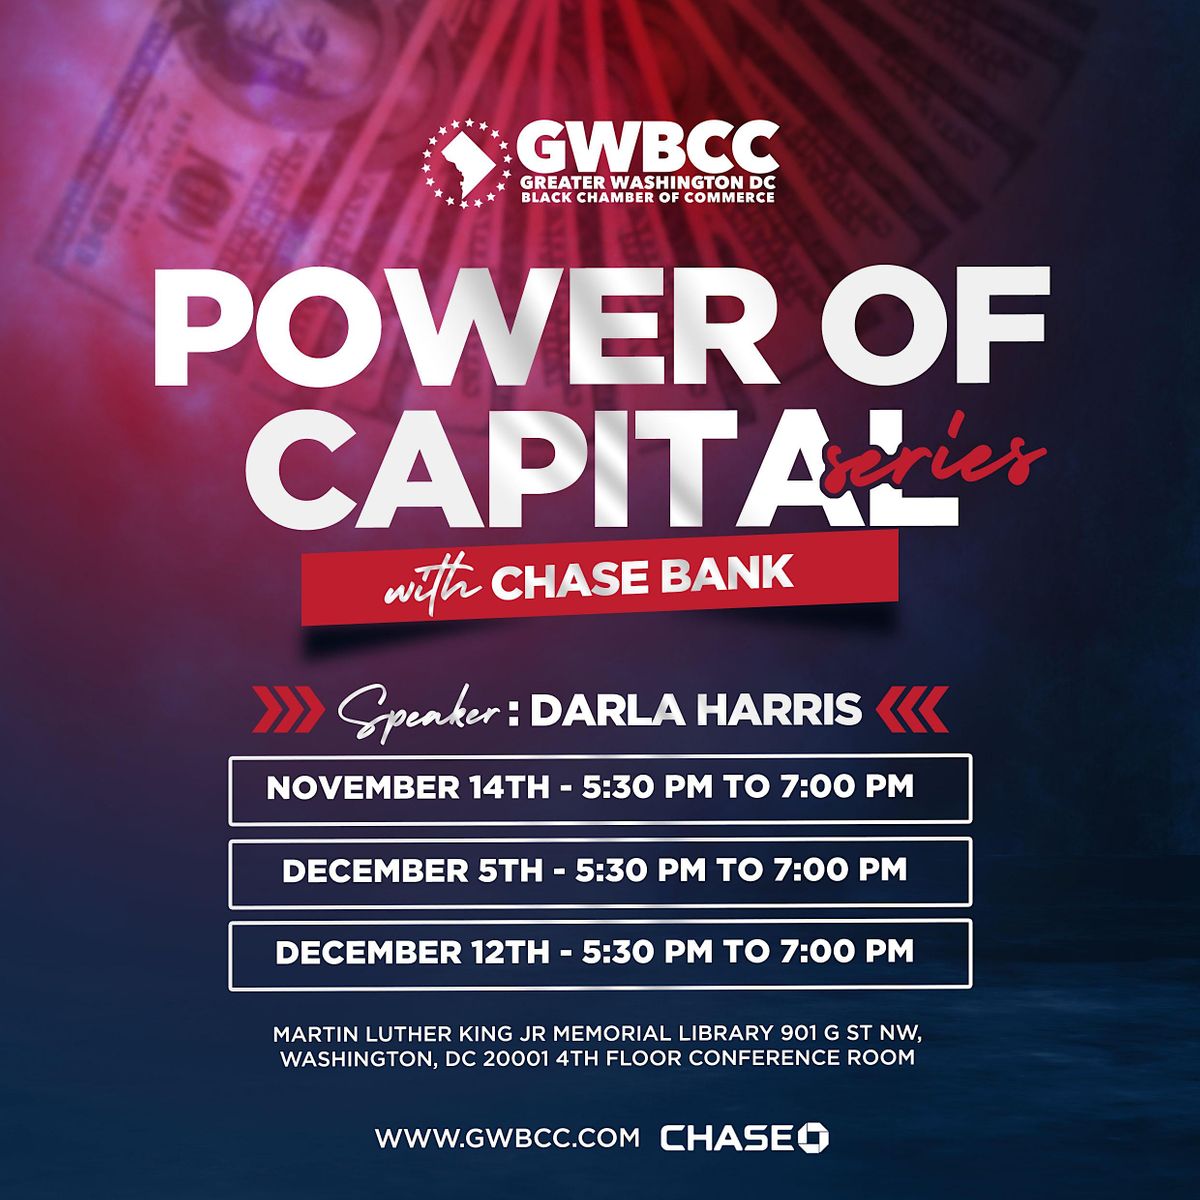 GWBCC Presents Power of Capital Series with Chase Bank Pt 2